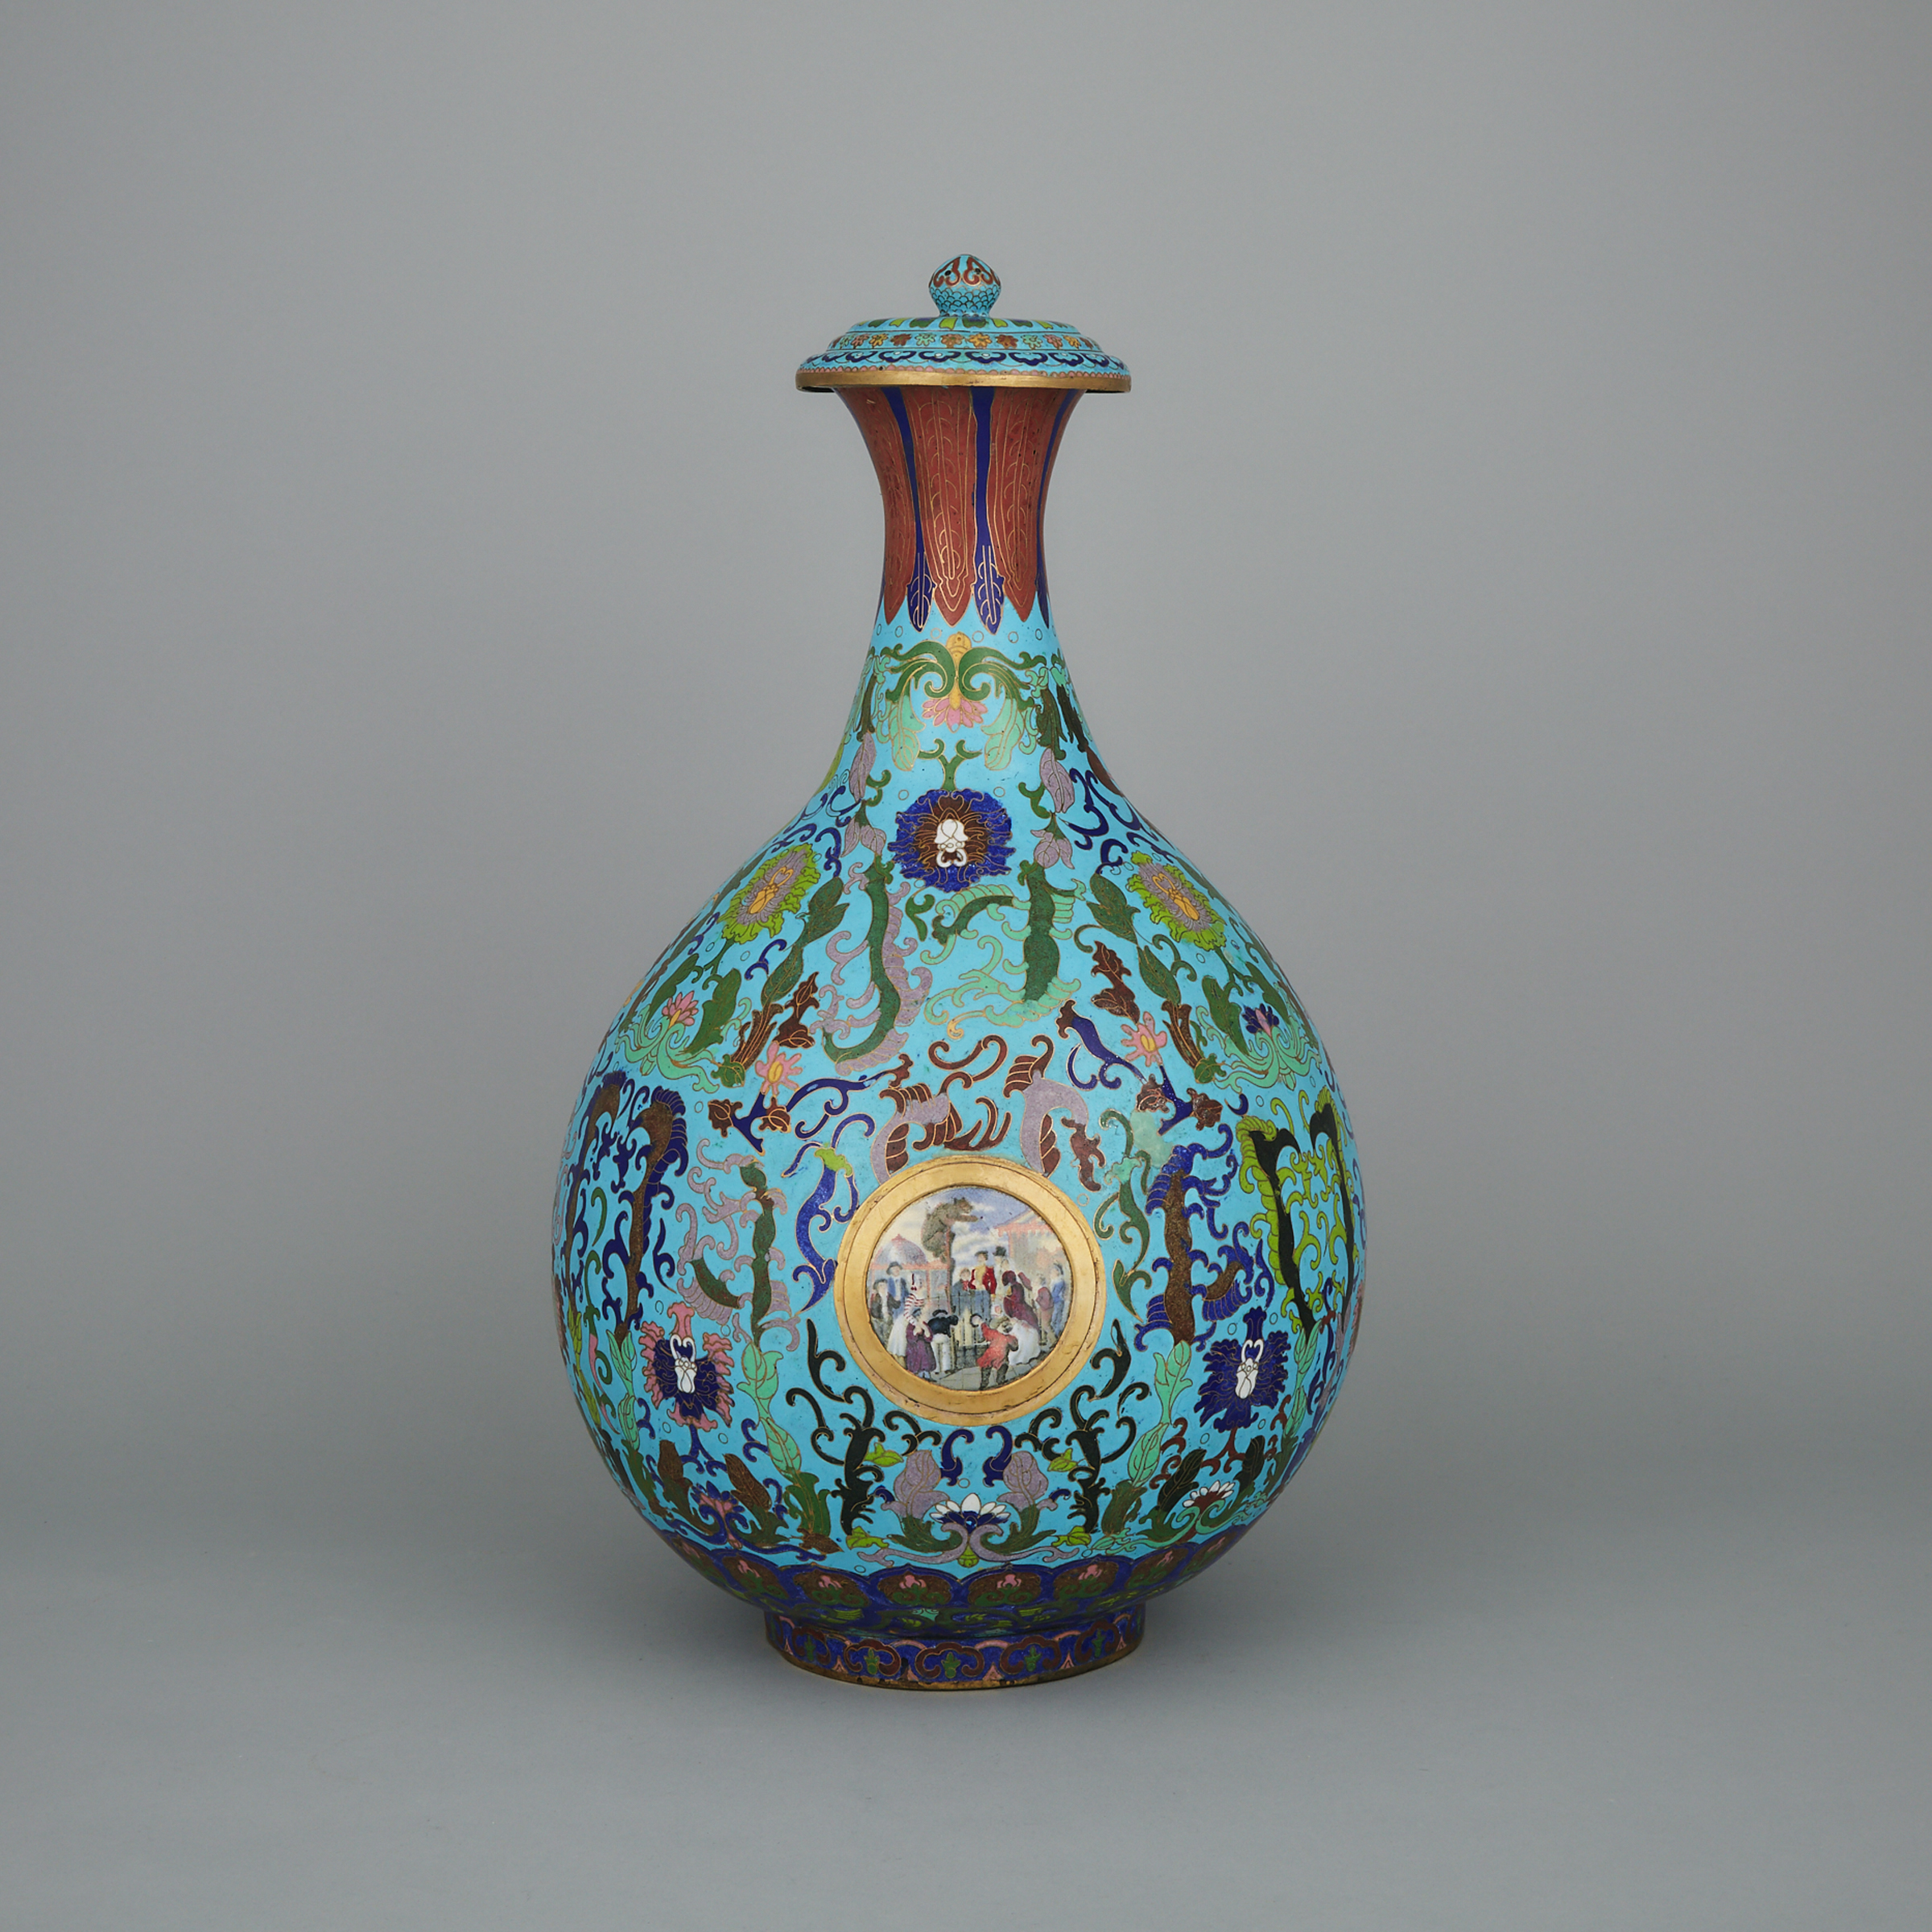 An Unusual Chinese Export Cloisonné Vase with Inlaid English Prattware Pot Lid Roundels, 19th Century